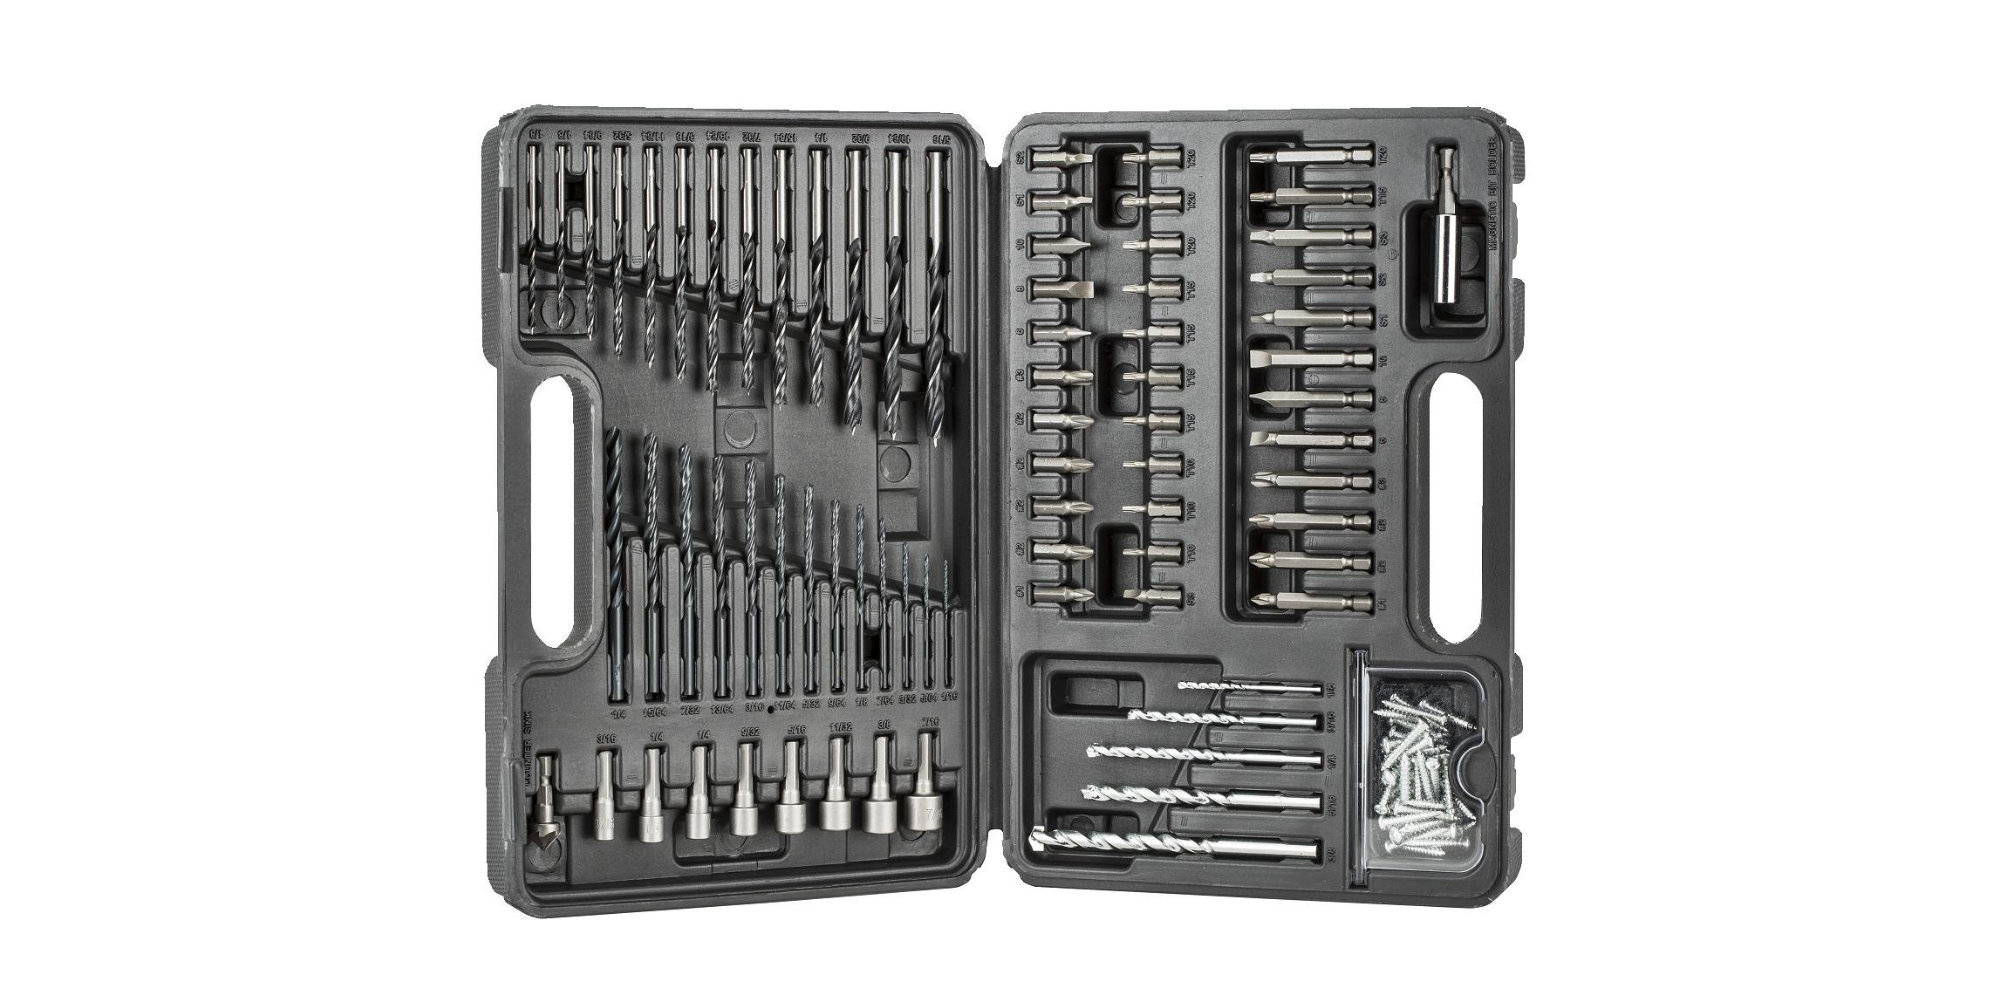 Get some of everything with BLACK+DECKER's 109-Pc. Bit Set: $12.50